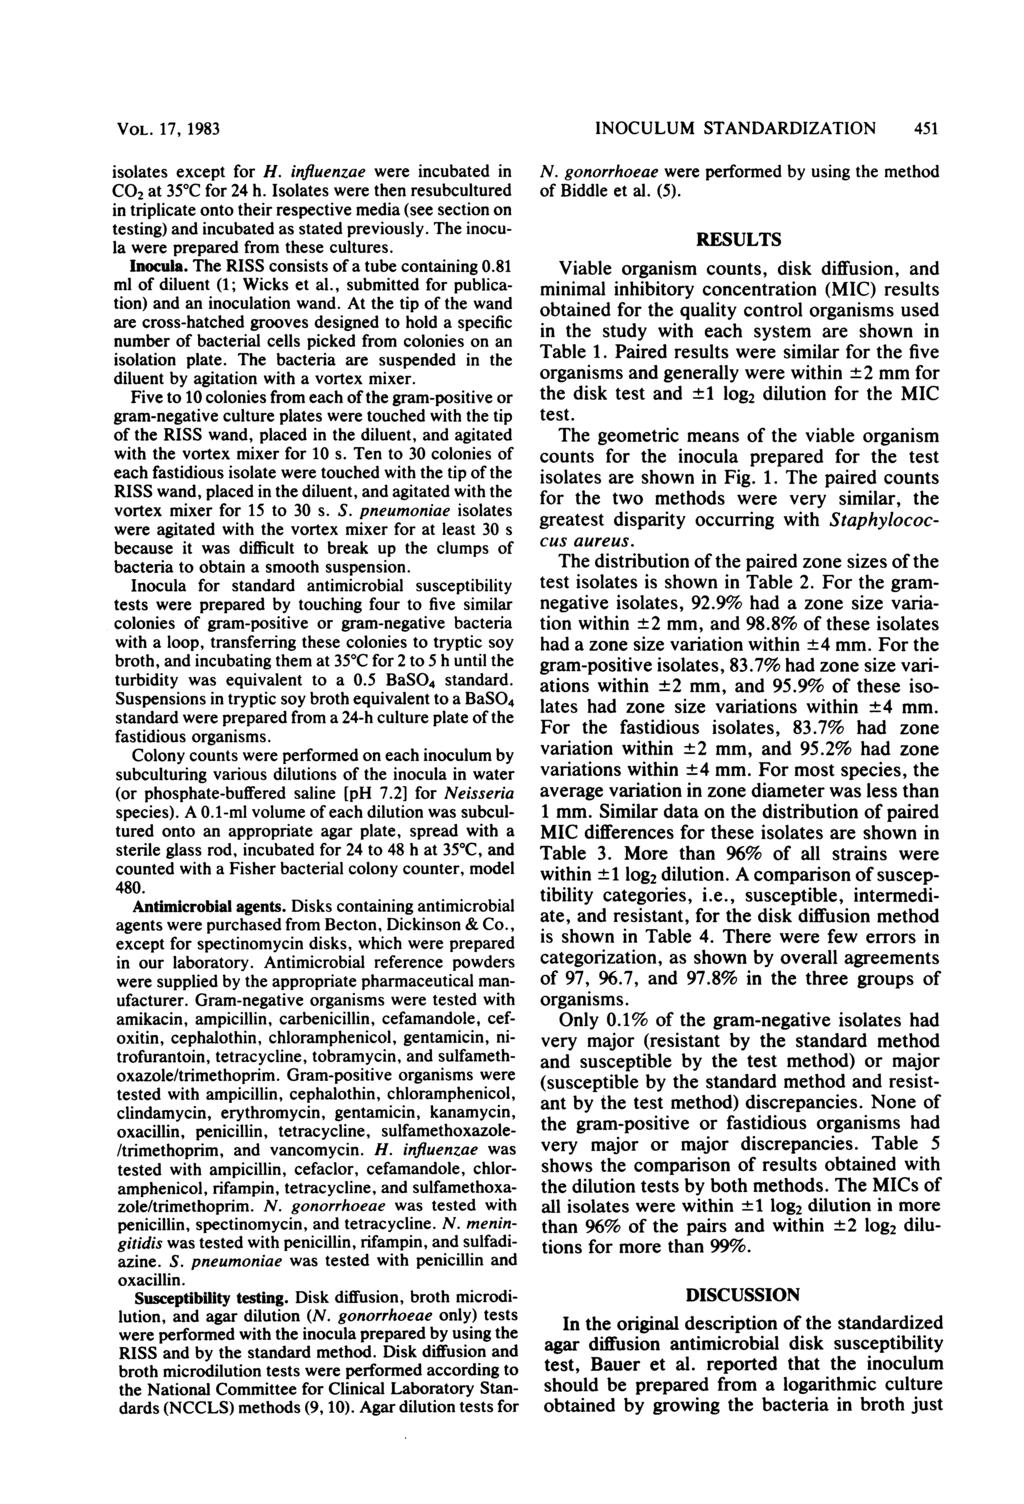 VOL. 17, 1983 isolates ecept for H. influenzae were incubated in CO2 at 35 C for 24 h.